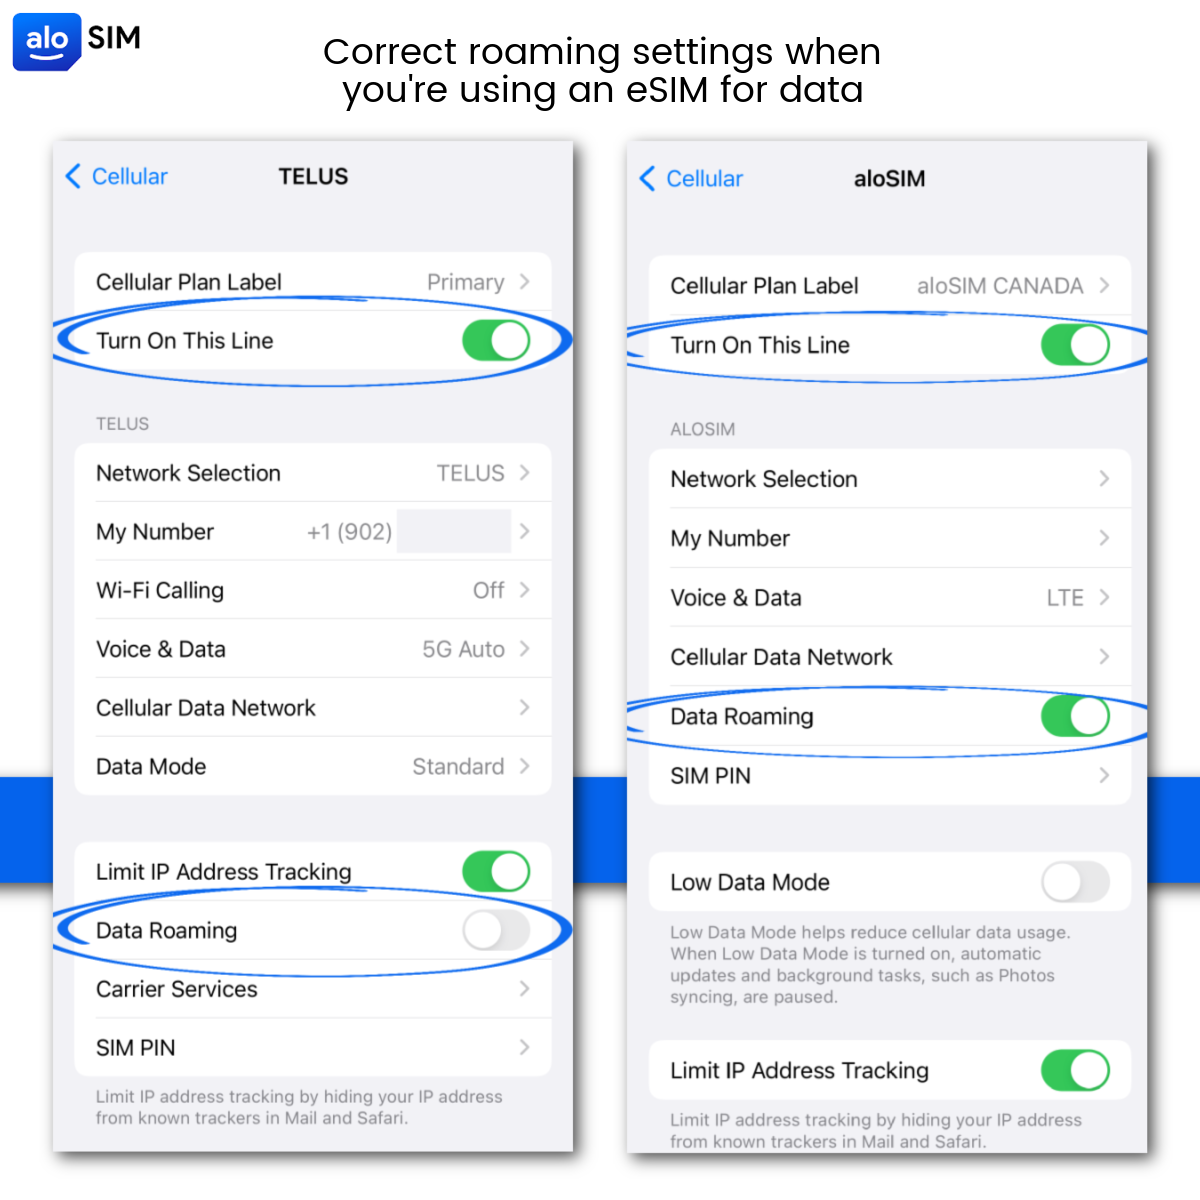 correct-roaming-settings-when-using-esim-for-cellular-data.png